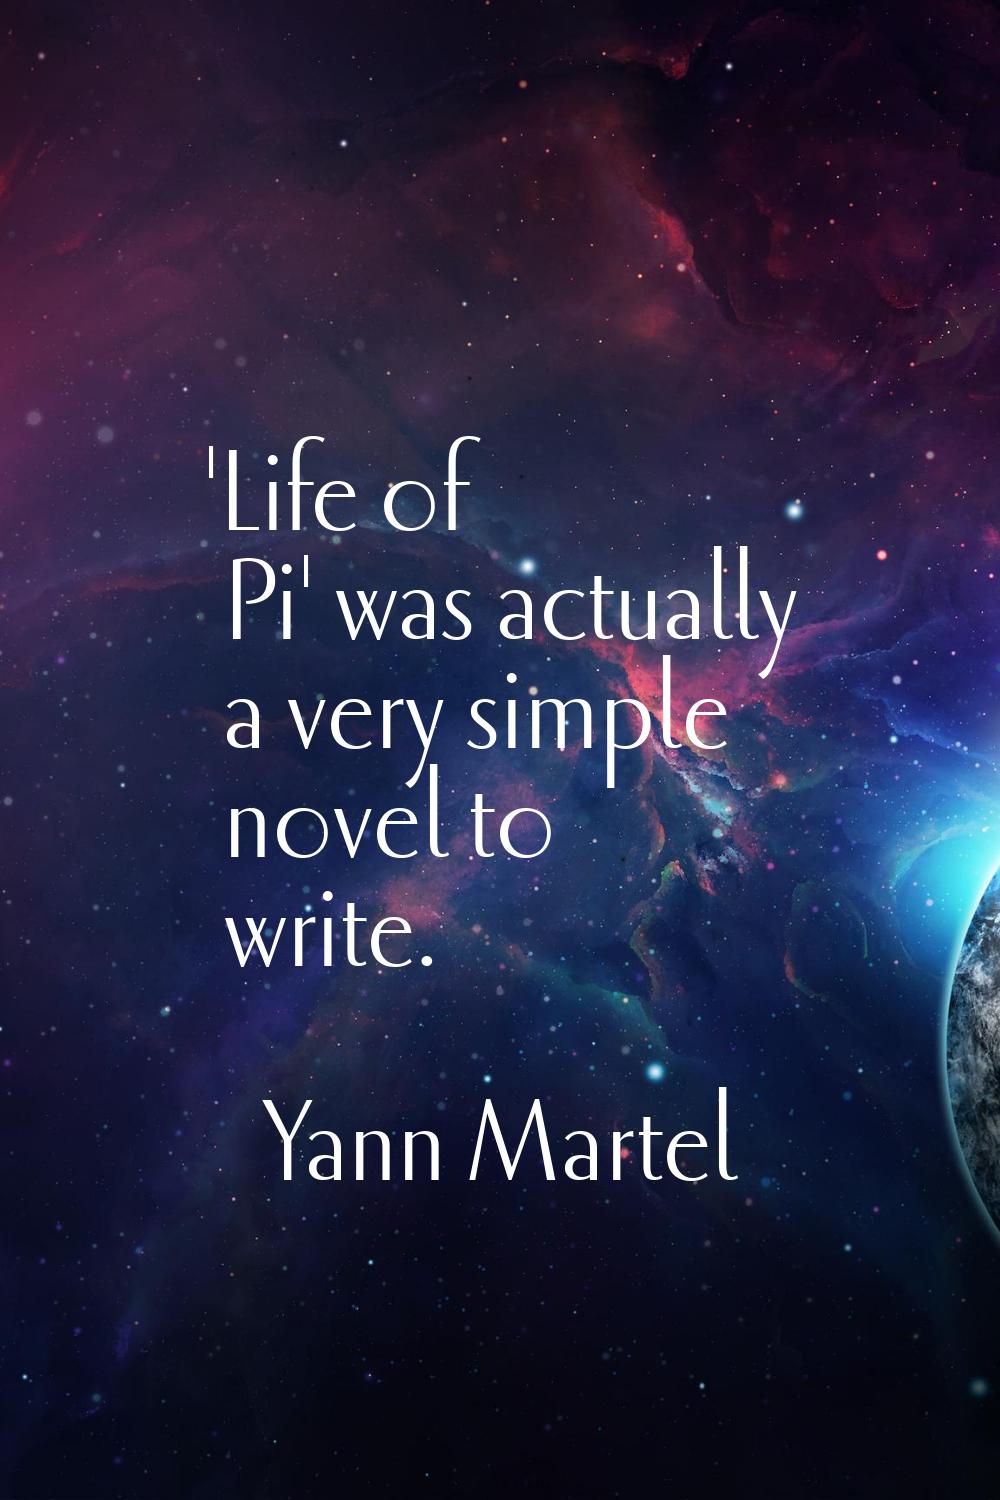 'Life of Pi' was actually a very simple novel to write.